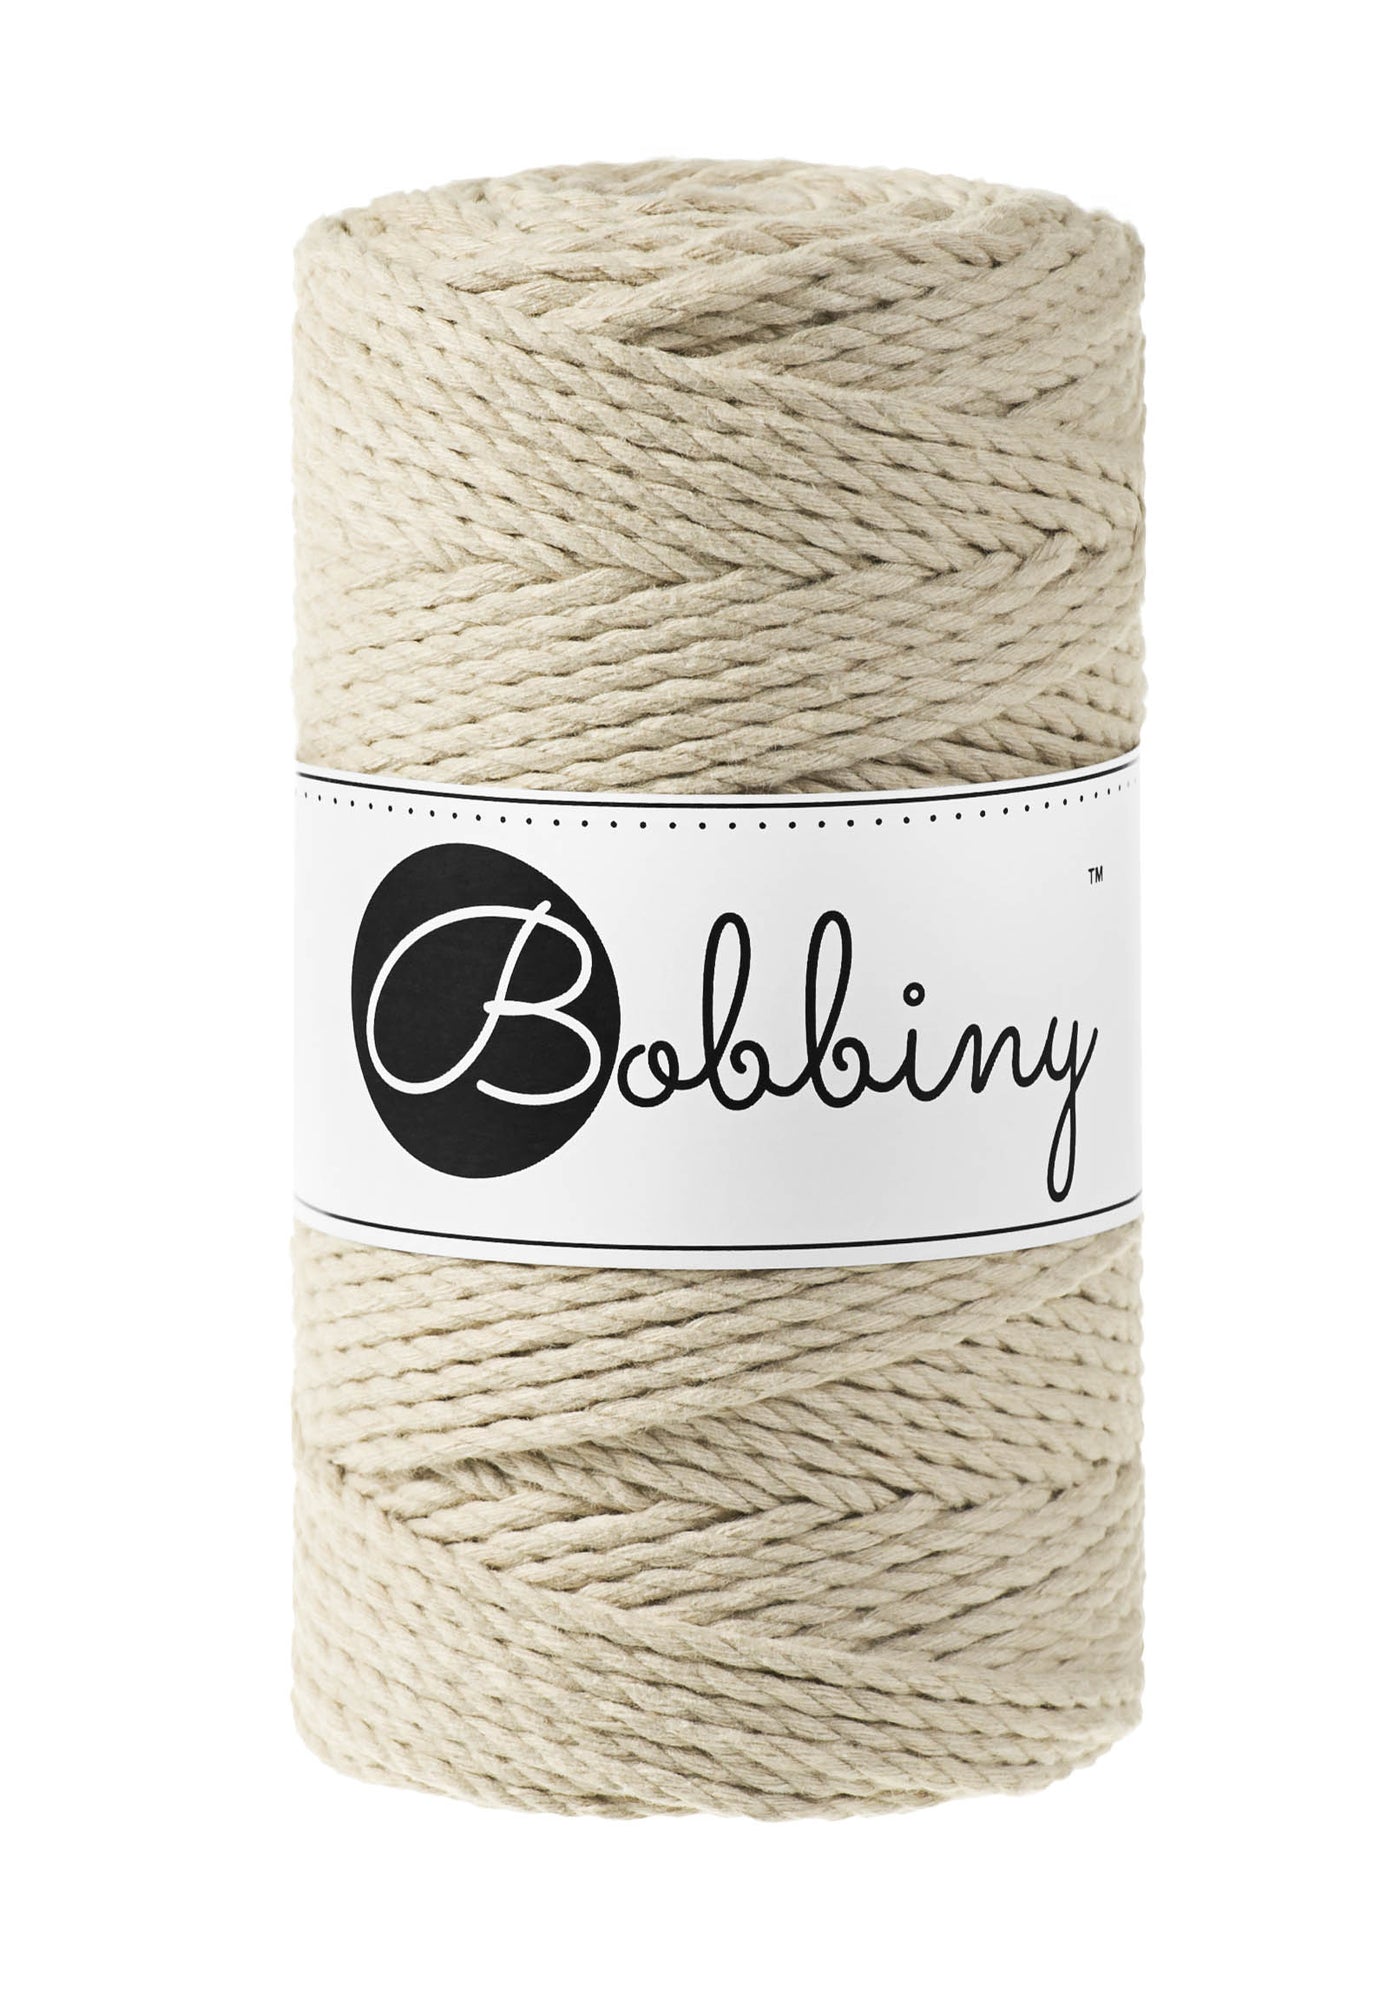 Made from 100% recycled cotton, this product is perfect for Macrame projects due to its sturdiness. It contains no harmful dyes or chemicals and is OEKO-TEK certified.  This super soft triple twist rope also makes the most spectacular fringes and tassels.  Length: 100m (108 Yards)  Weight: 400gms  Contains 60 Fibres ( 3x20 )  Also available in 5mm